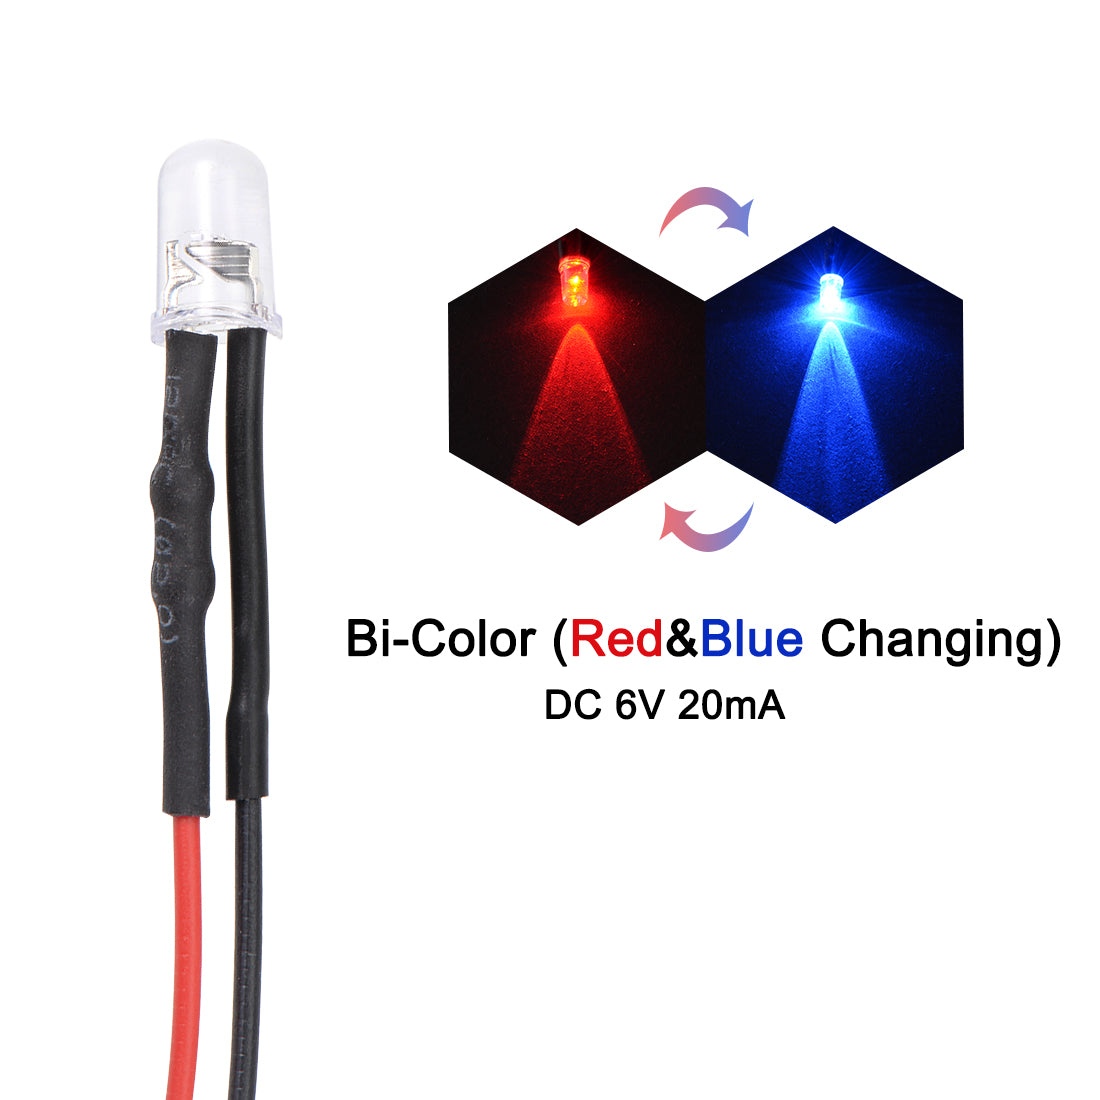 uxcell Uxcell 15Pcs DC 6V 5mm Pre Wired LED, Flashing Bi-Color (Red&Blue Changing) Light Round Top Clear Lens, Light Emitting Diodes with Edge